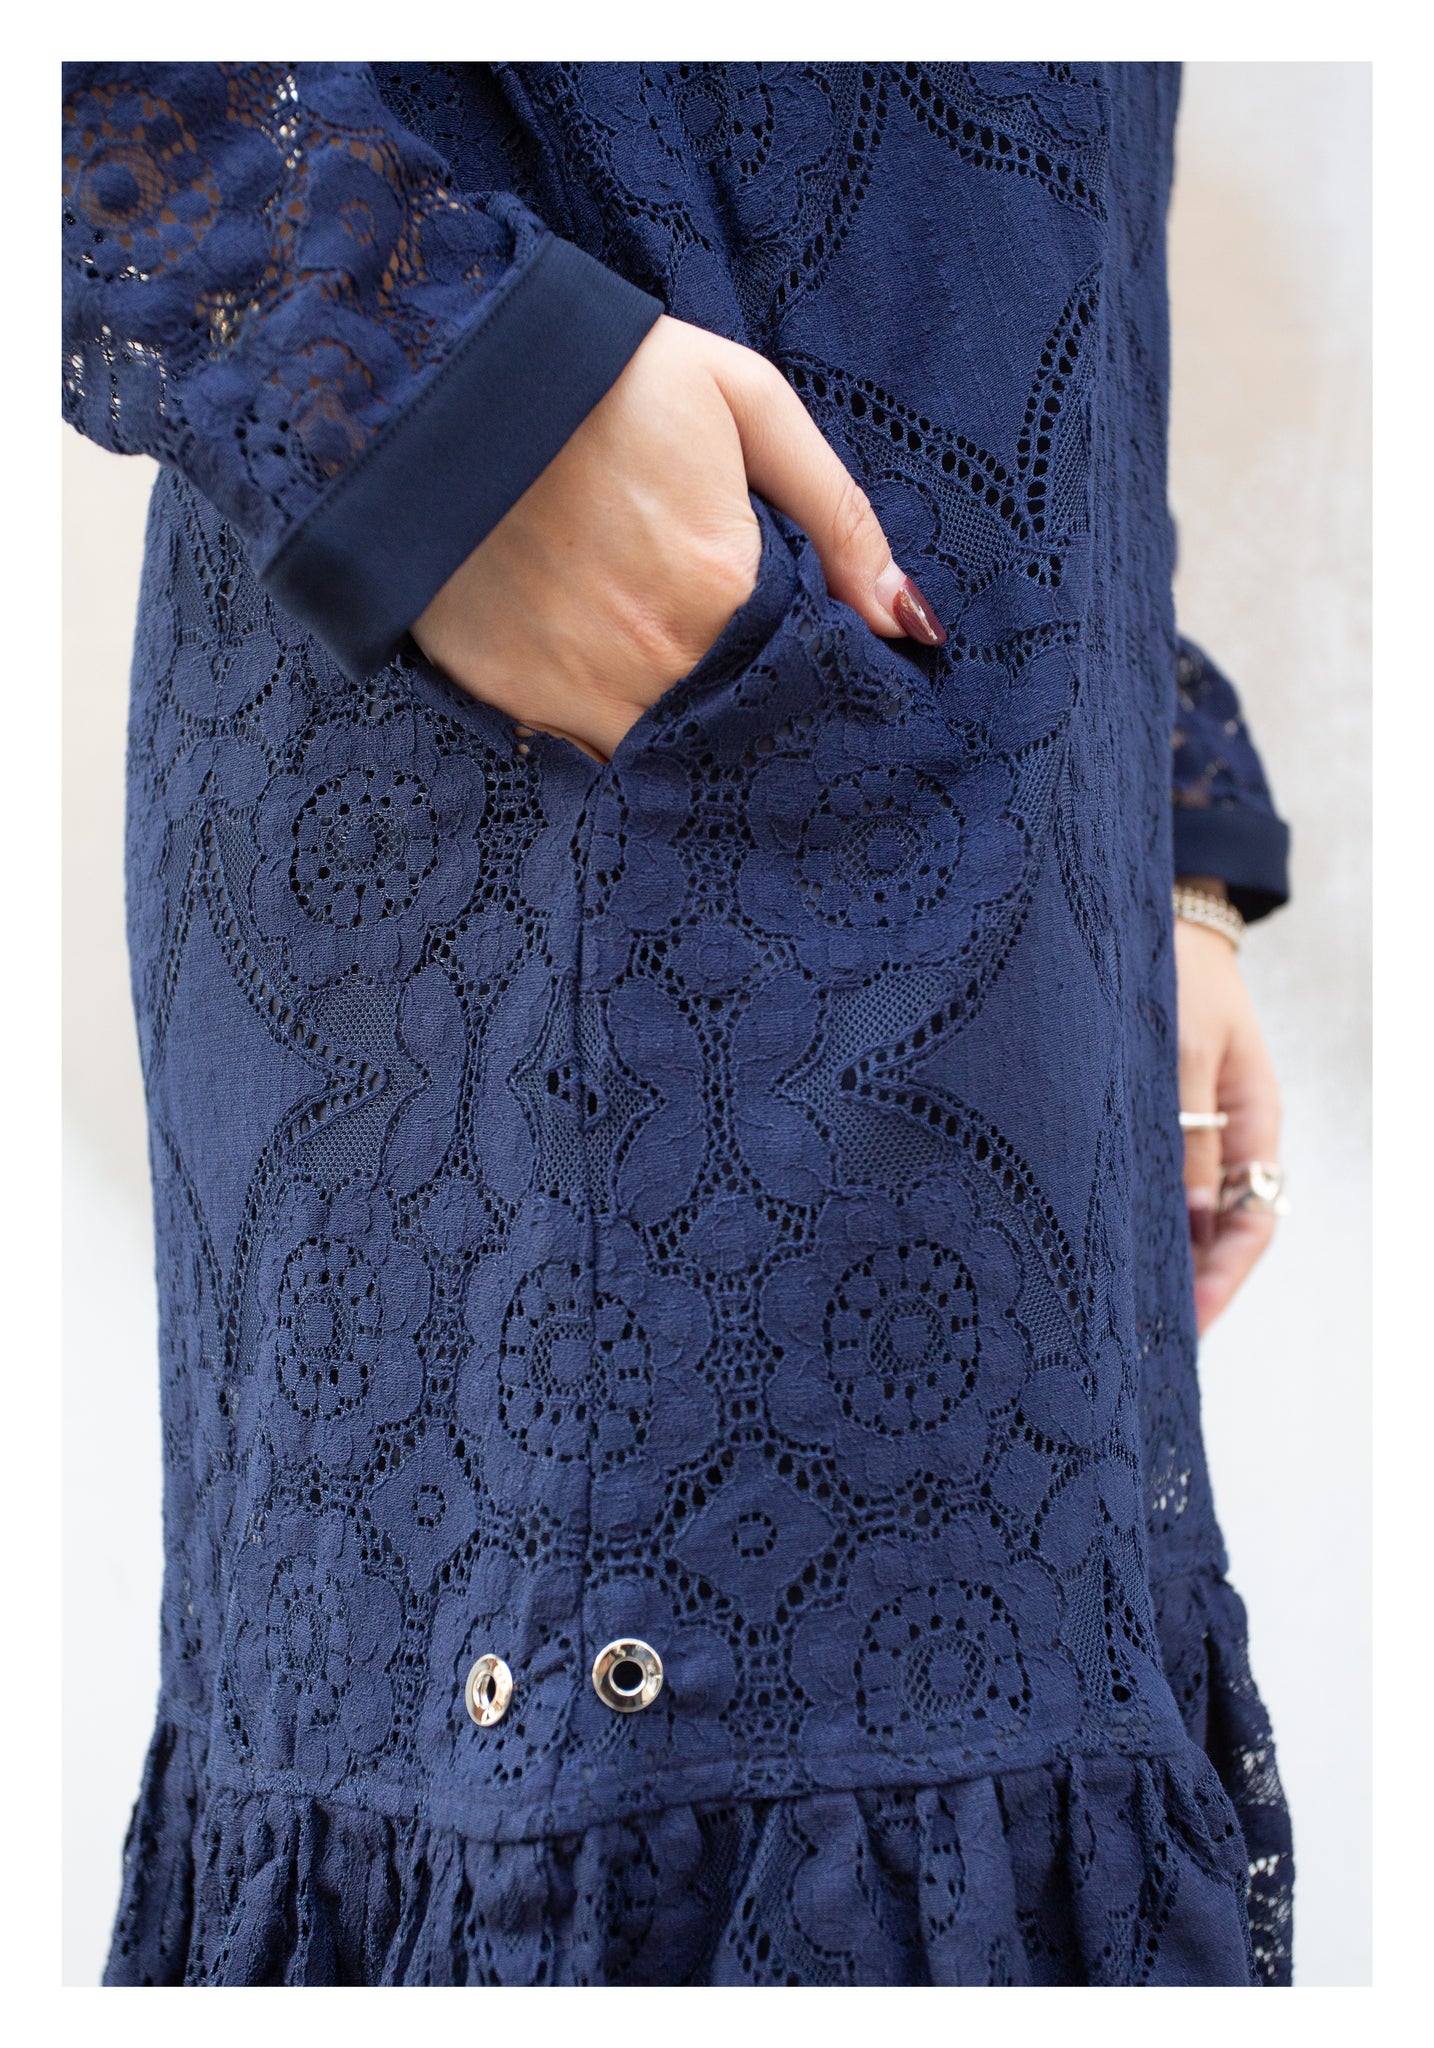 The Moment Lace Dress Navy - whoami